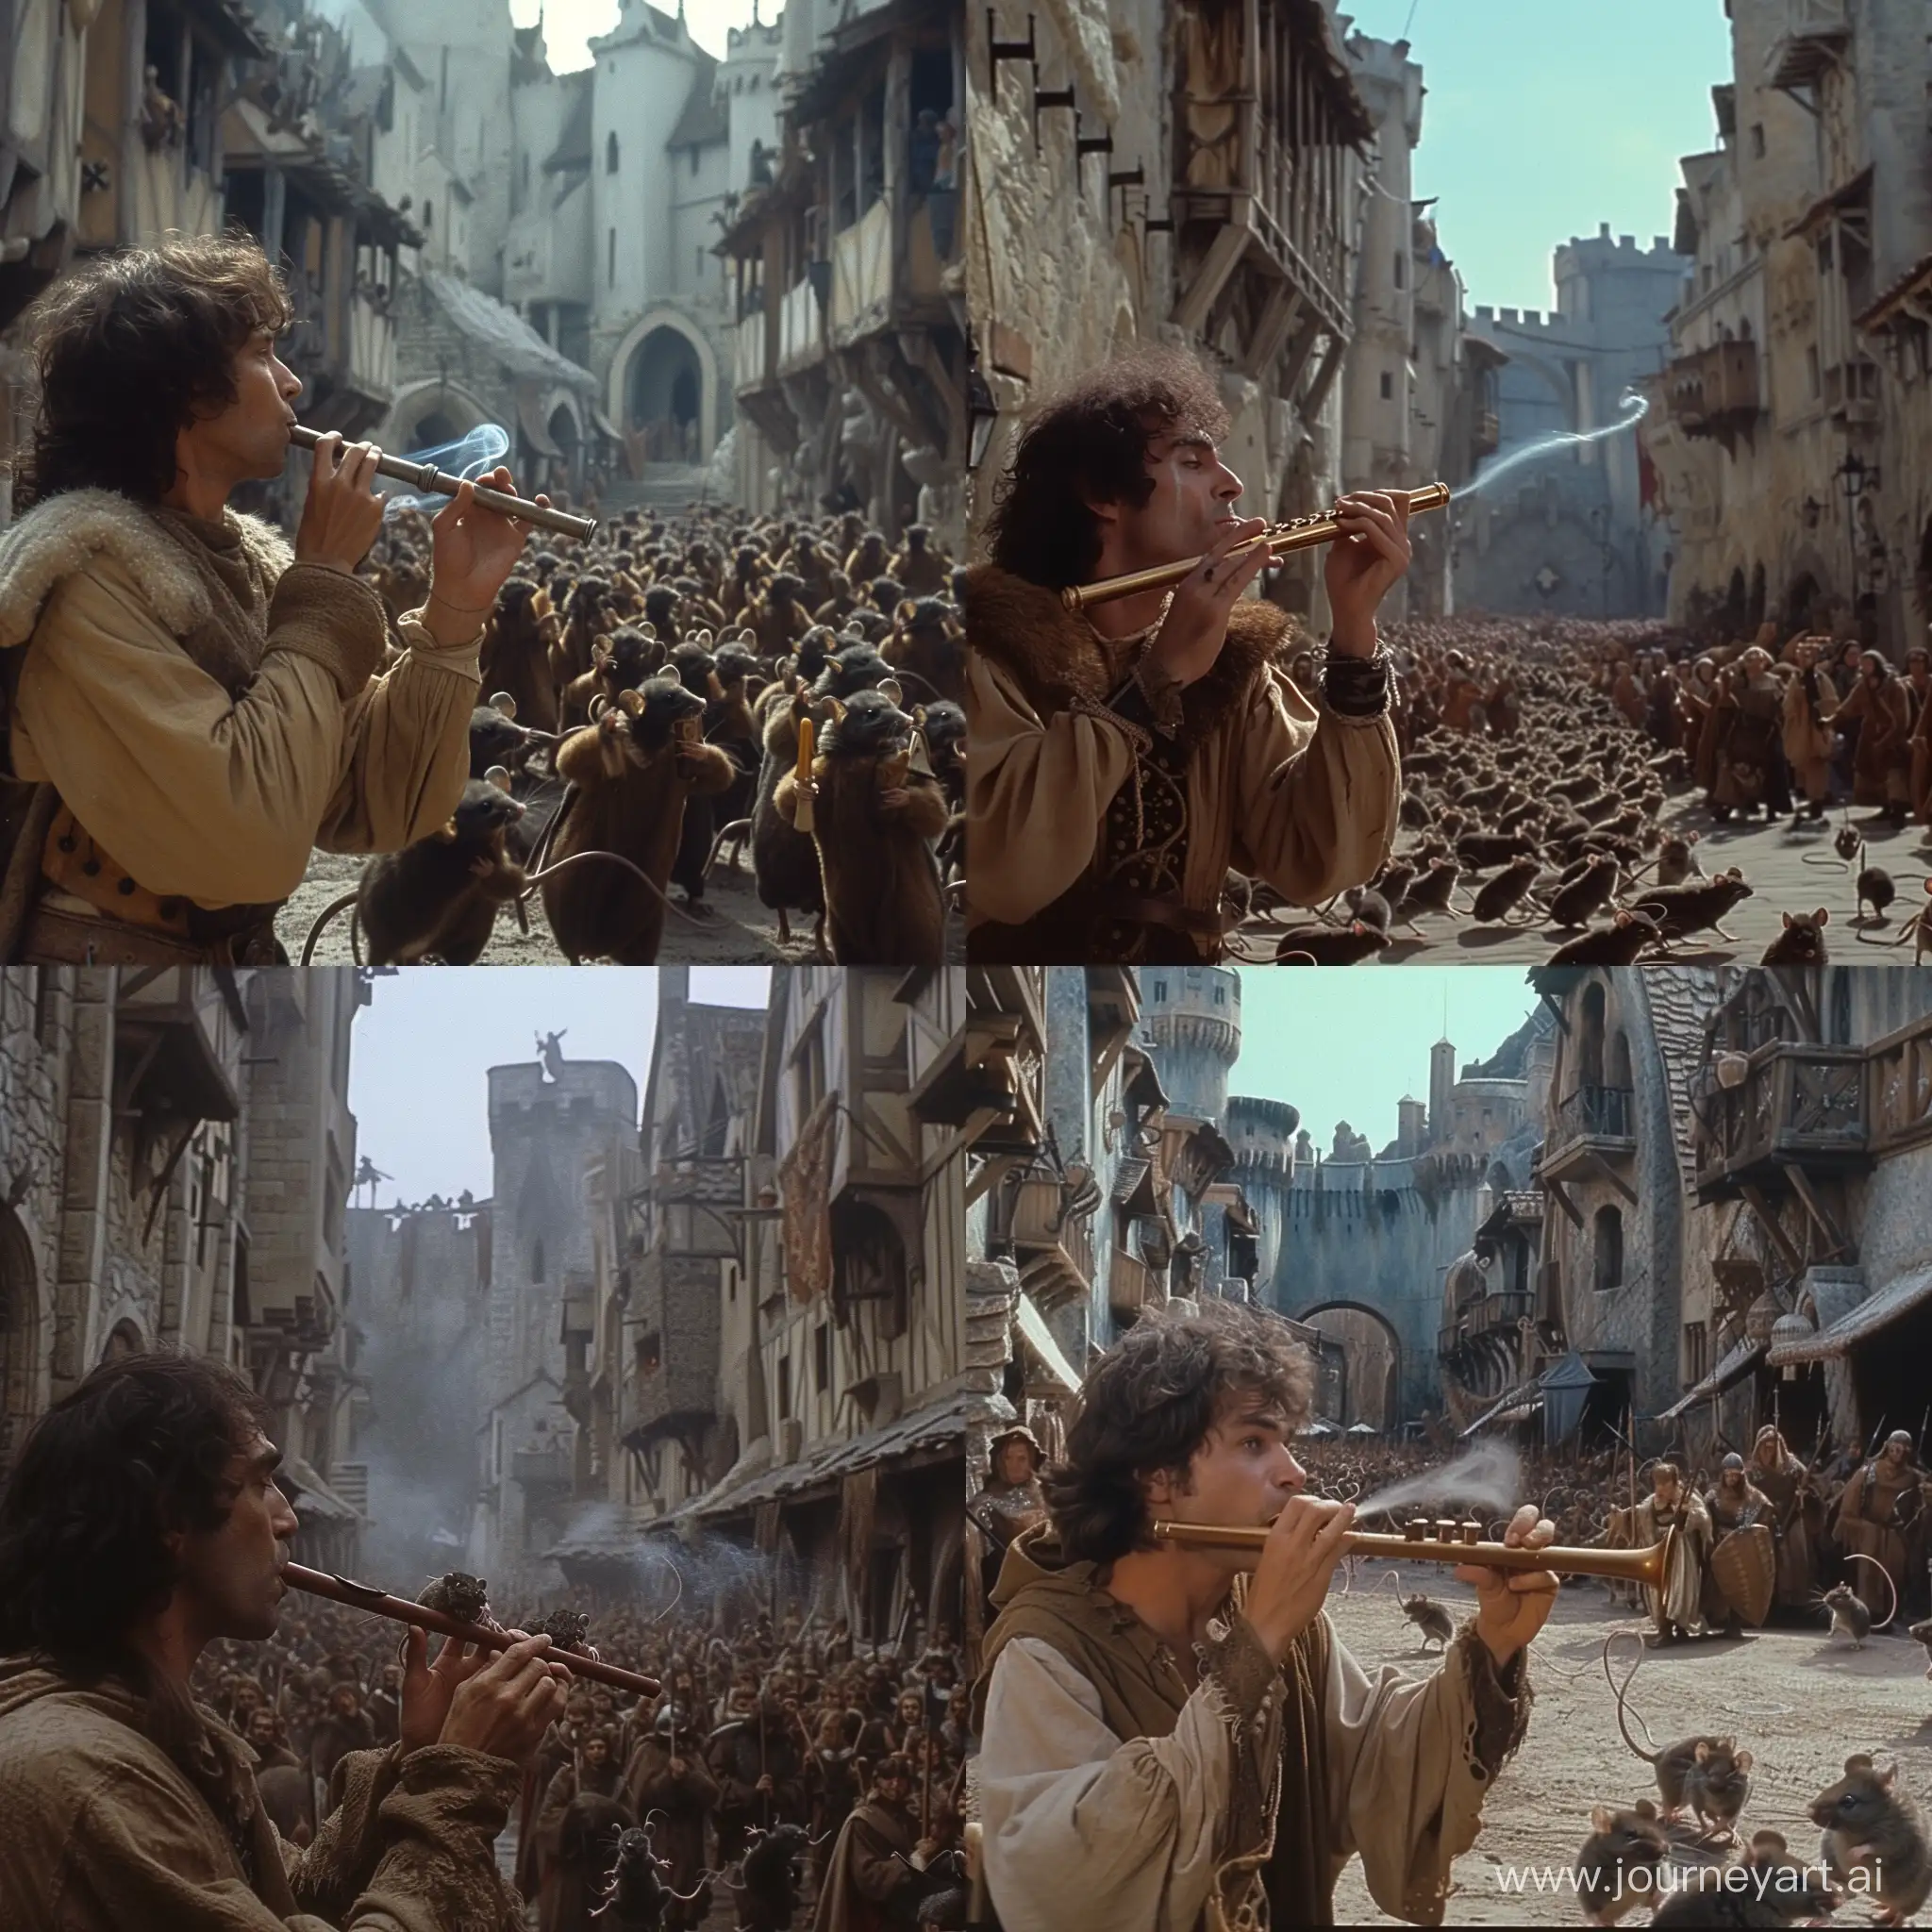 a man blowing his flute and enchanted mice through the streets of a medieval city, screenshot from excalibur 1981